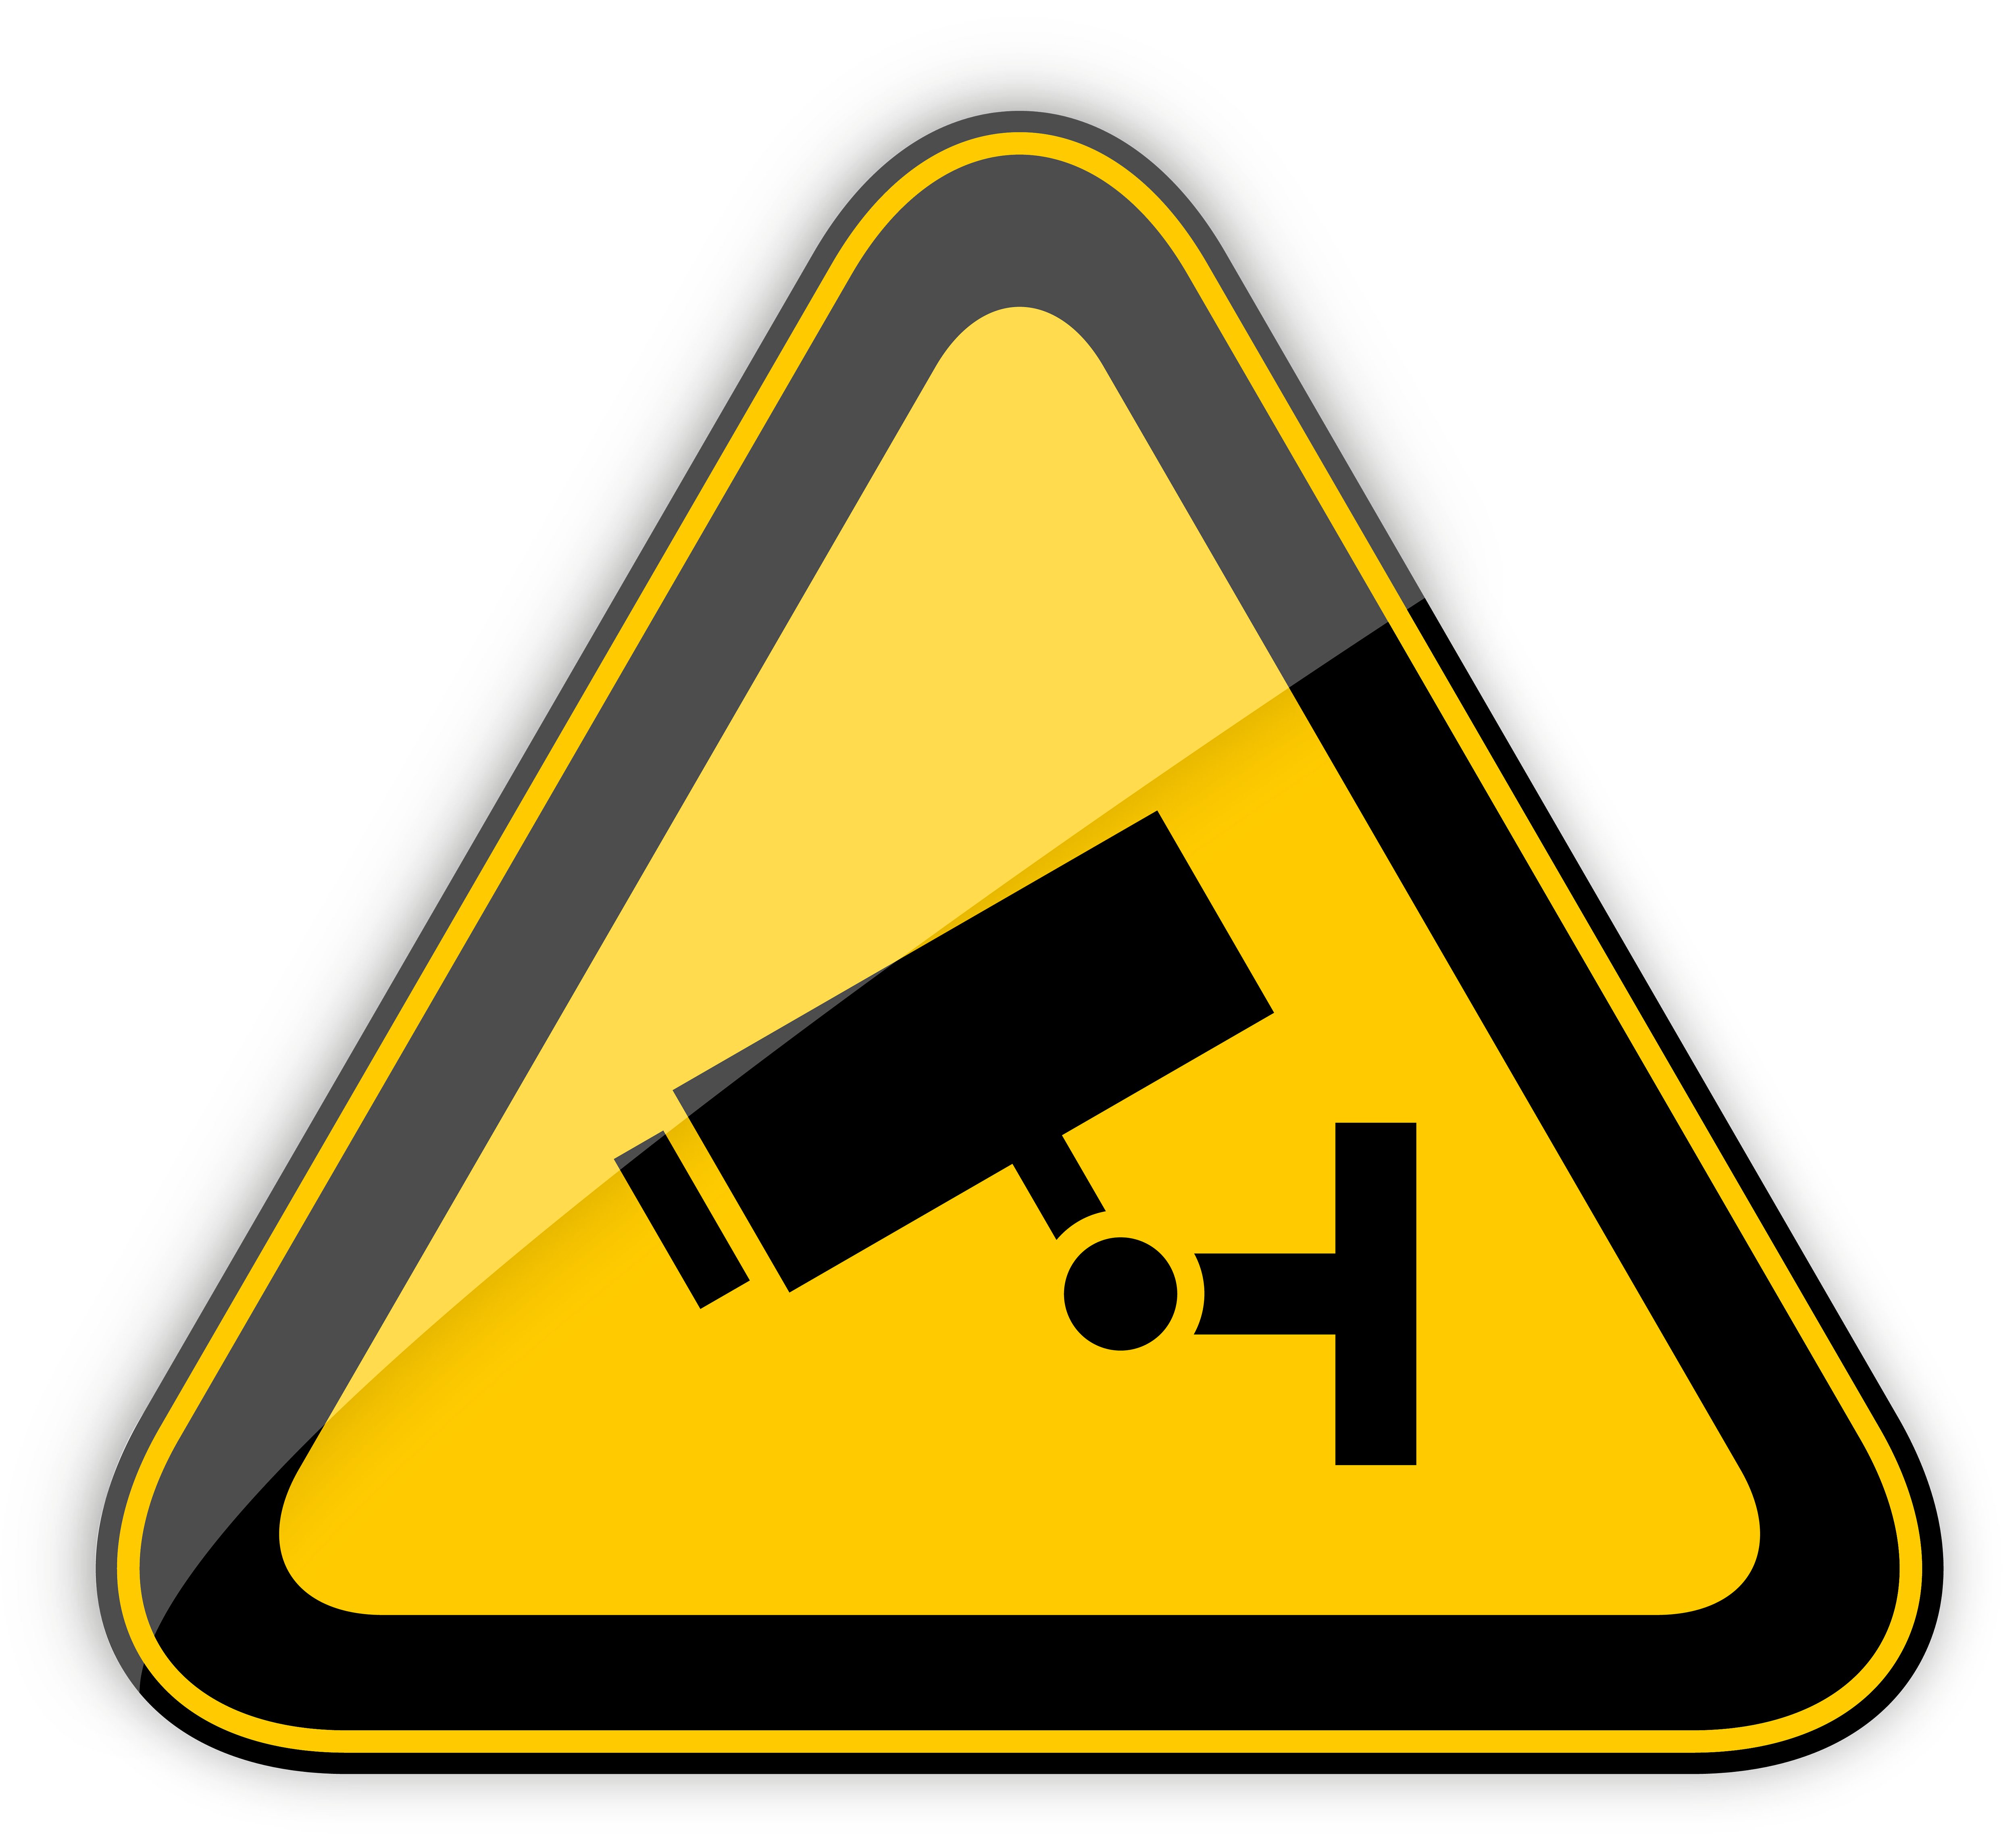 CCTV in Operation Warning Sign PNG Clipart.